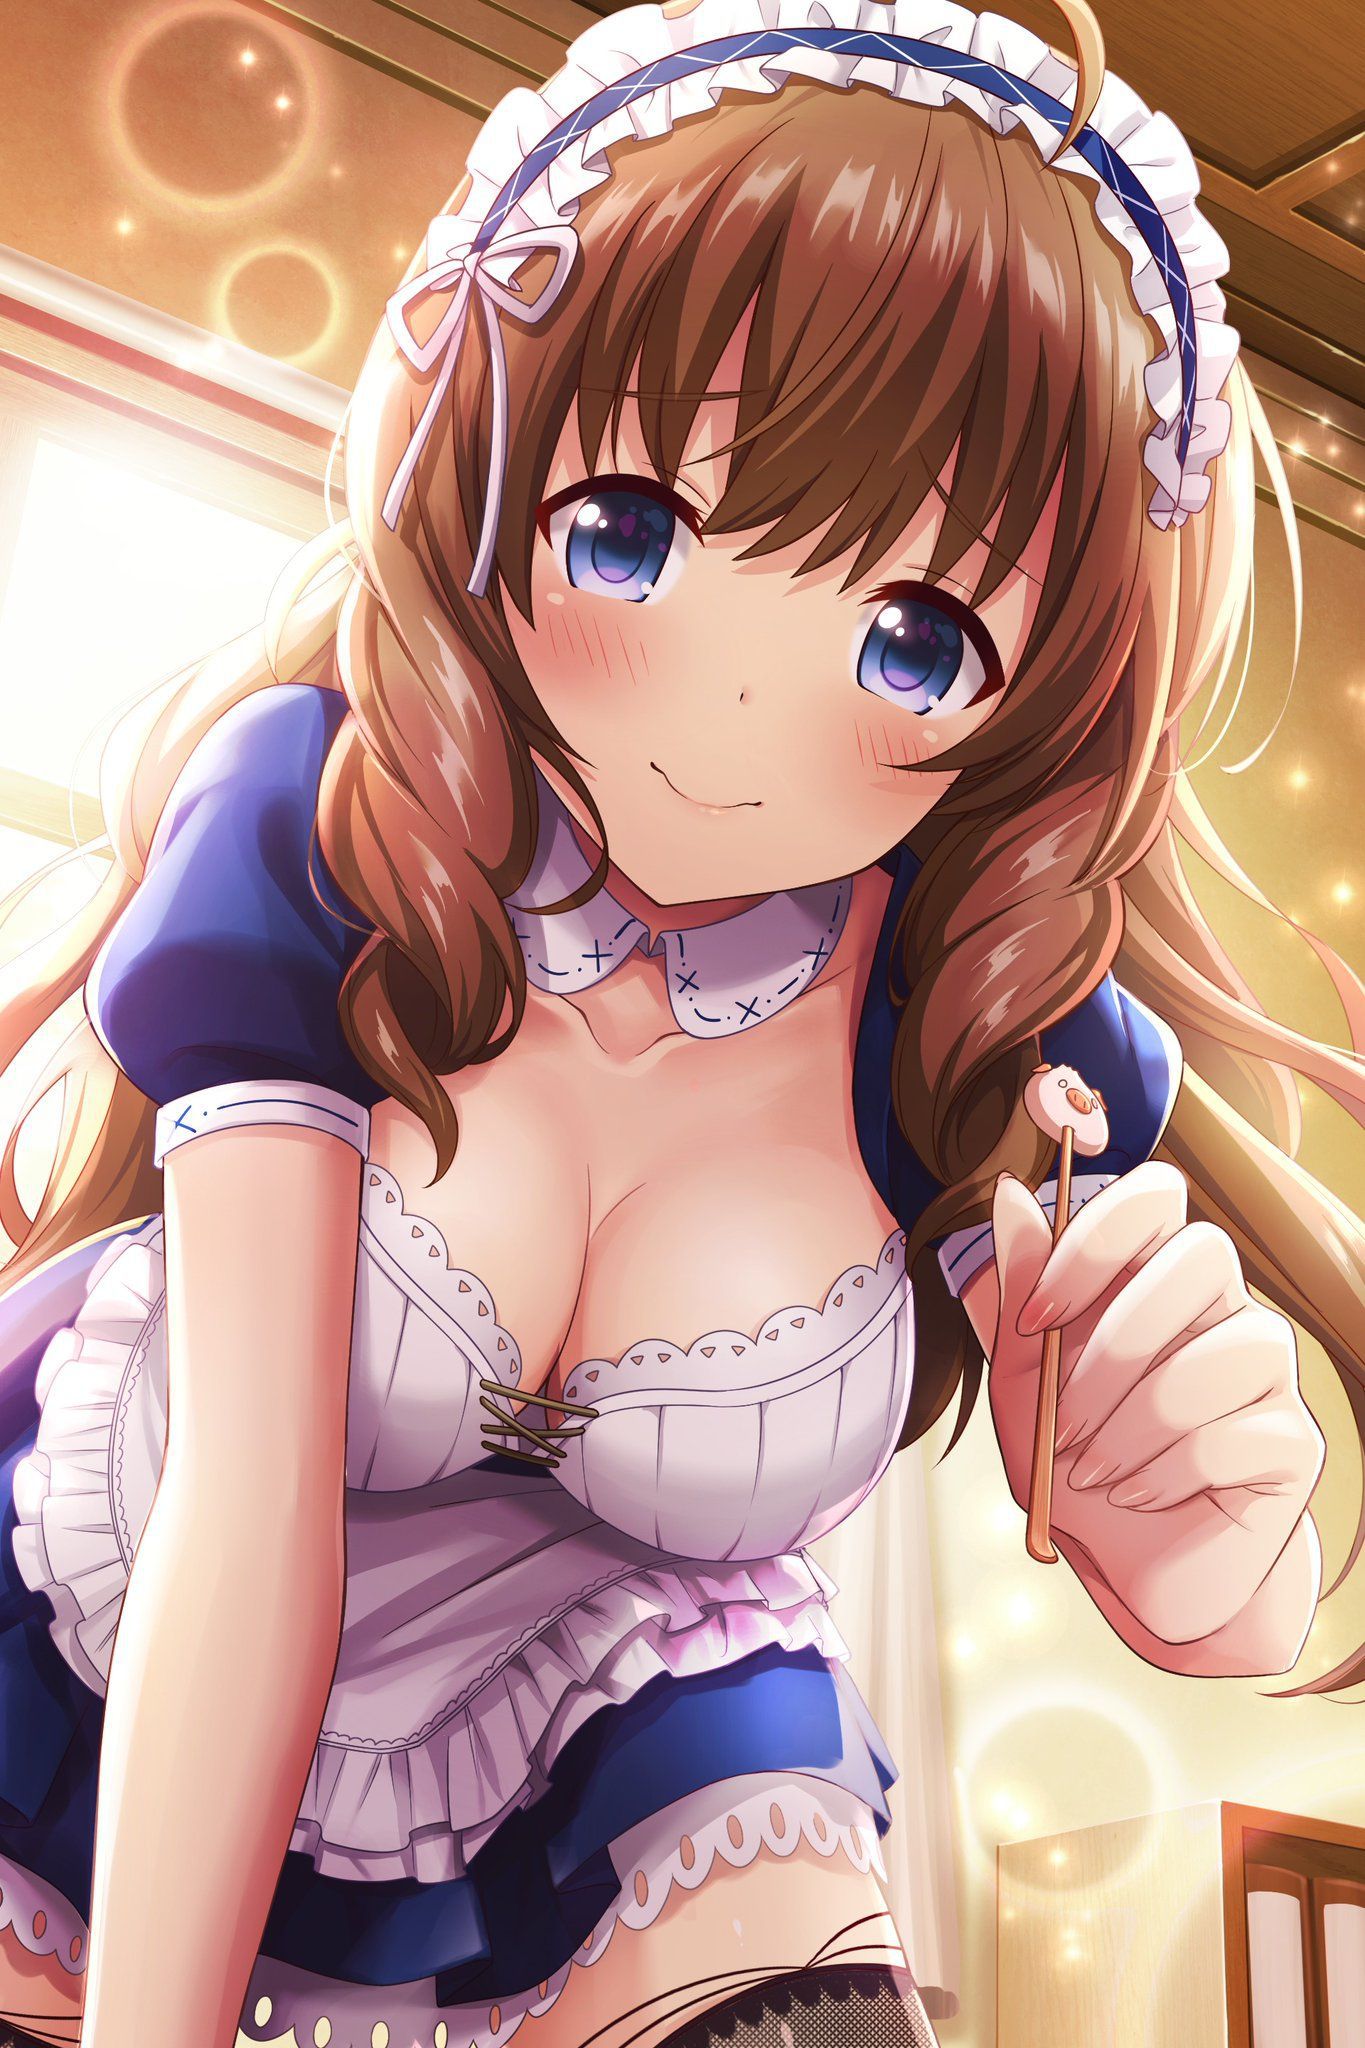 [Secondary erotic] image of a cute maid who seems to do things [44 sheets] 36